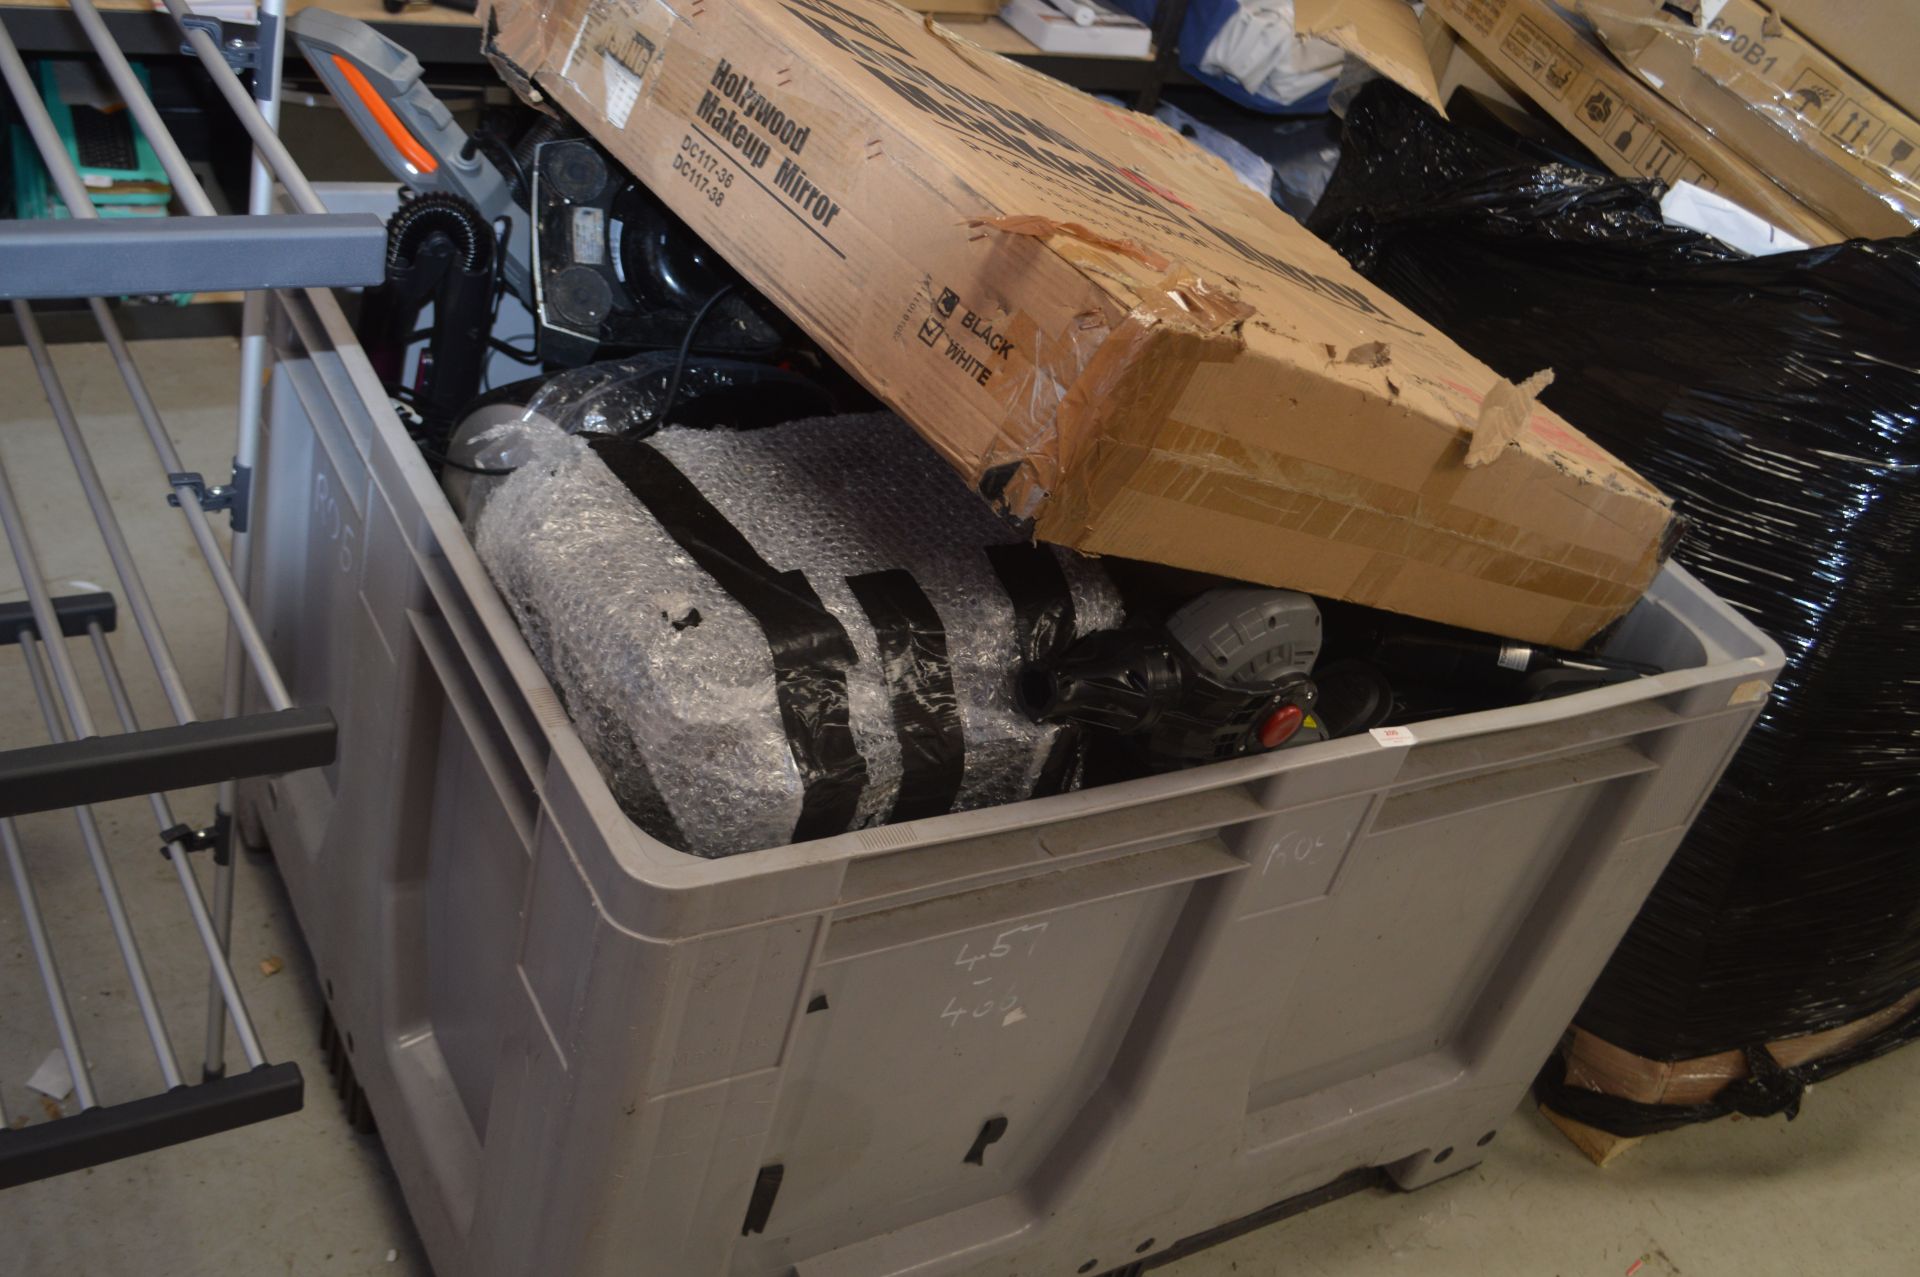 *Contents of Pallet Box to Include Bathroom Mirrors, Vacuums, Air Fryers, Electric Scooters etc. (